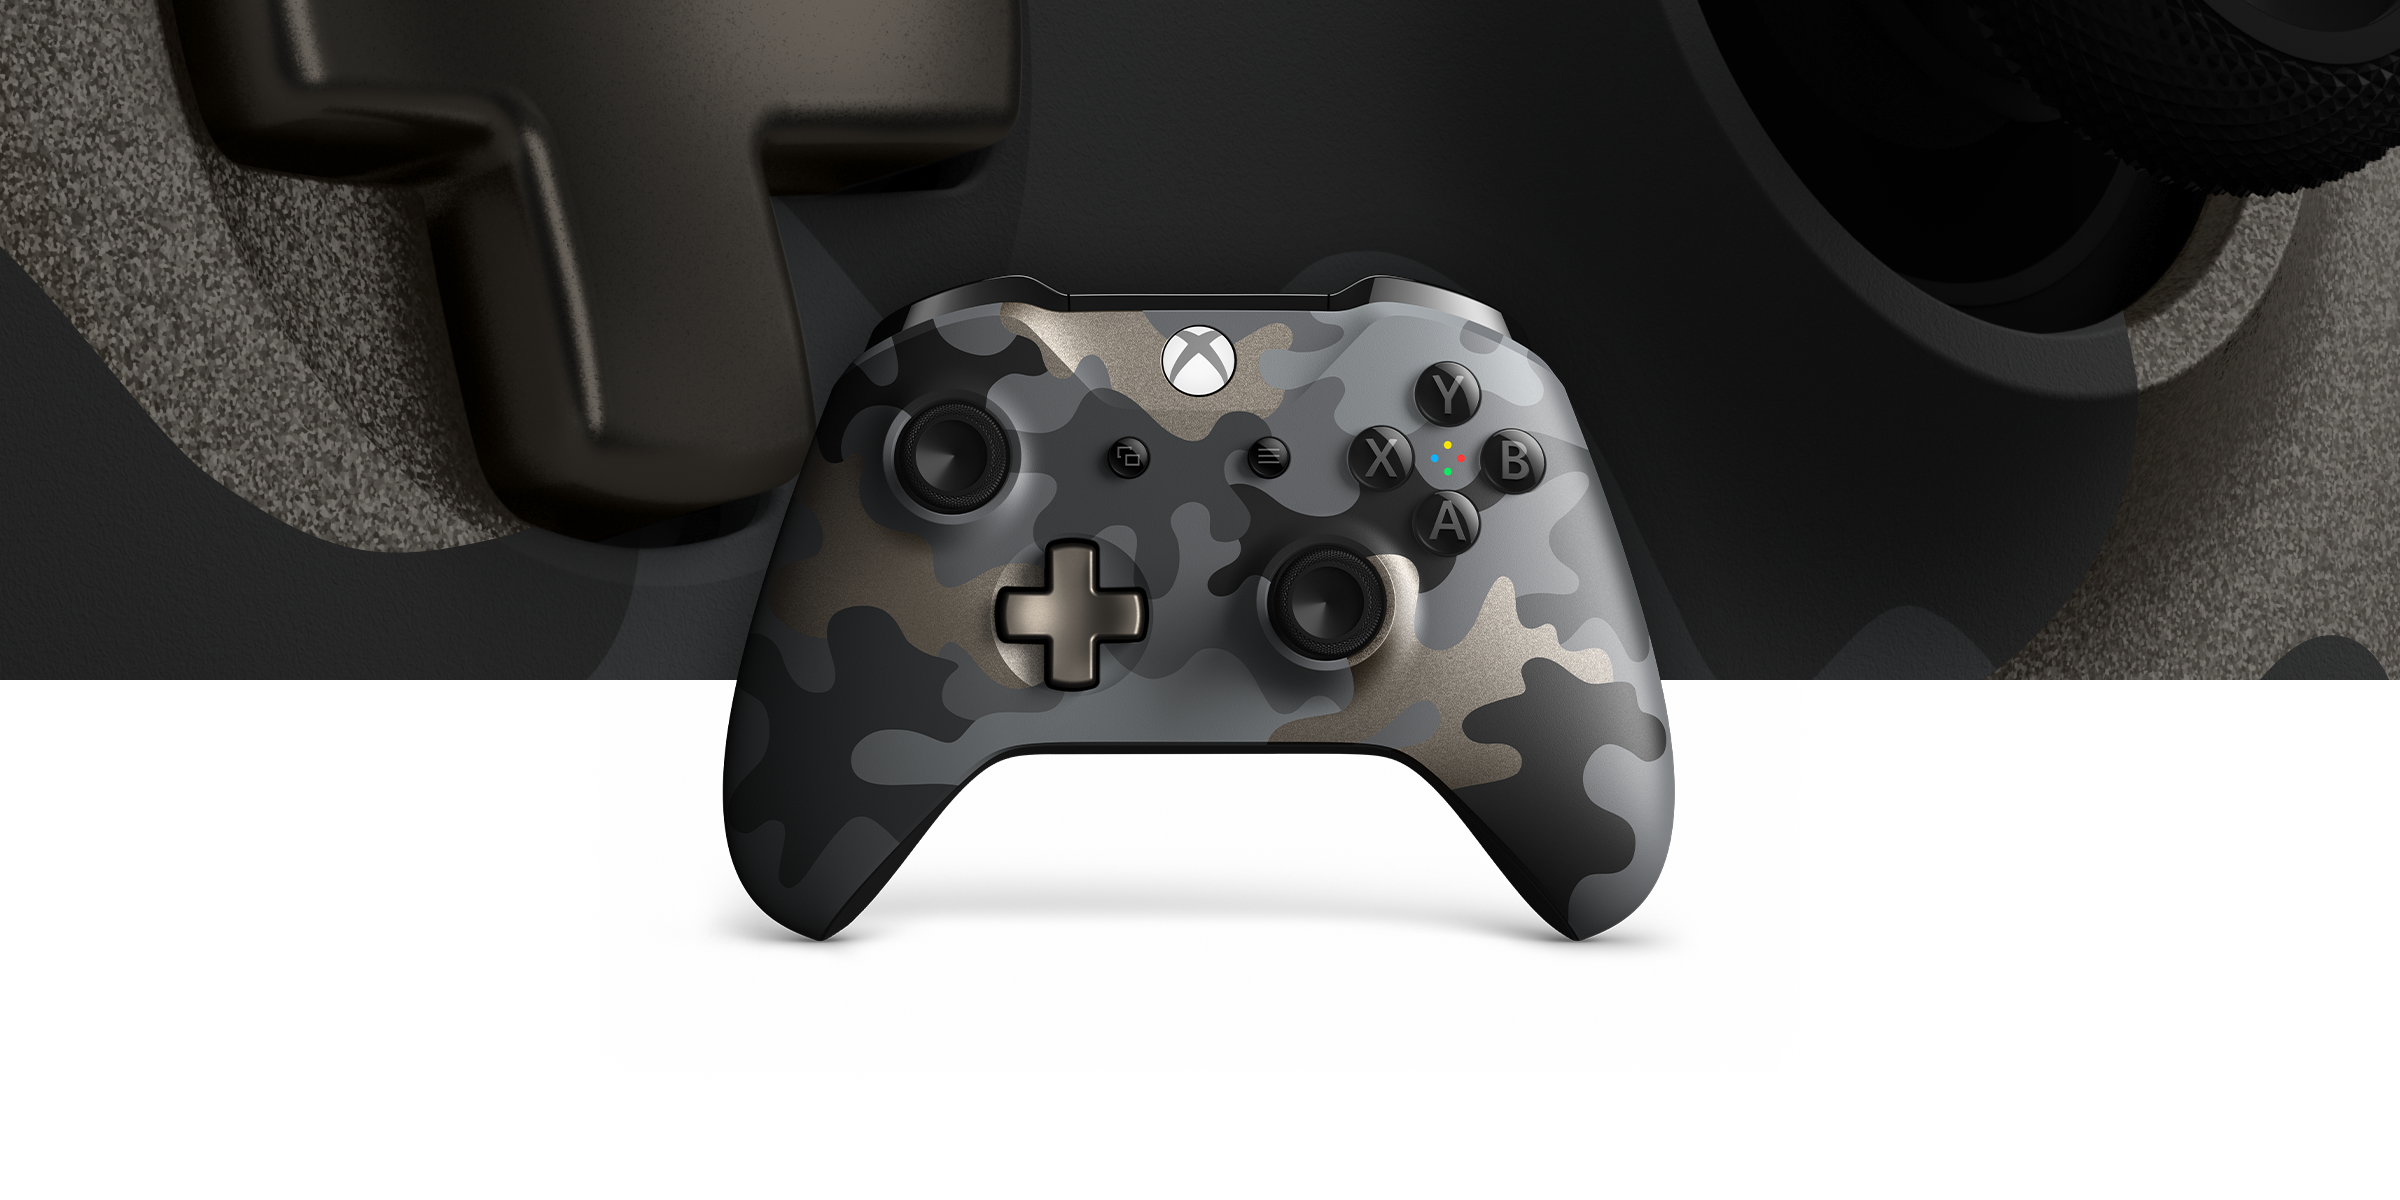 Microsoft - Special Edition Camouflage Wireless Controller for Xbox